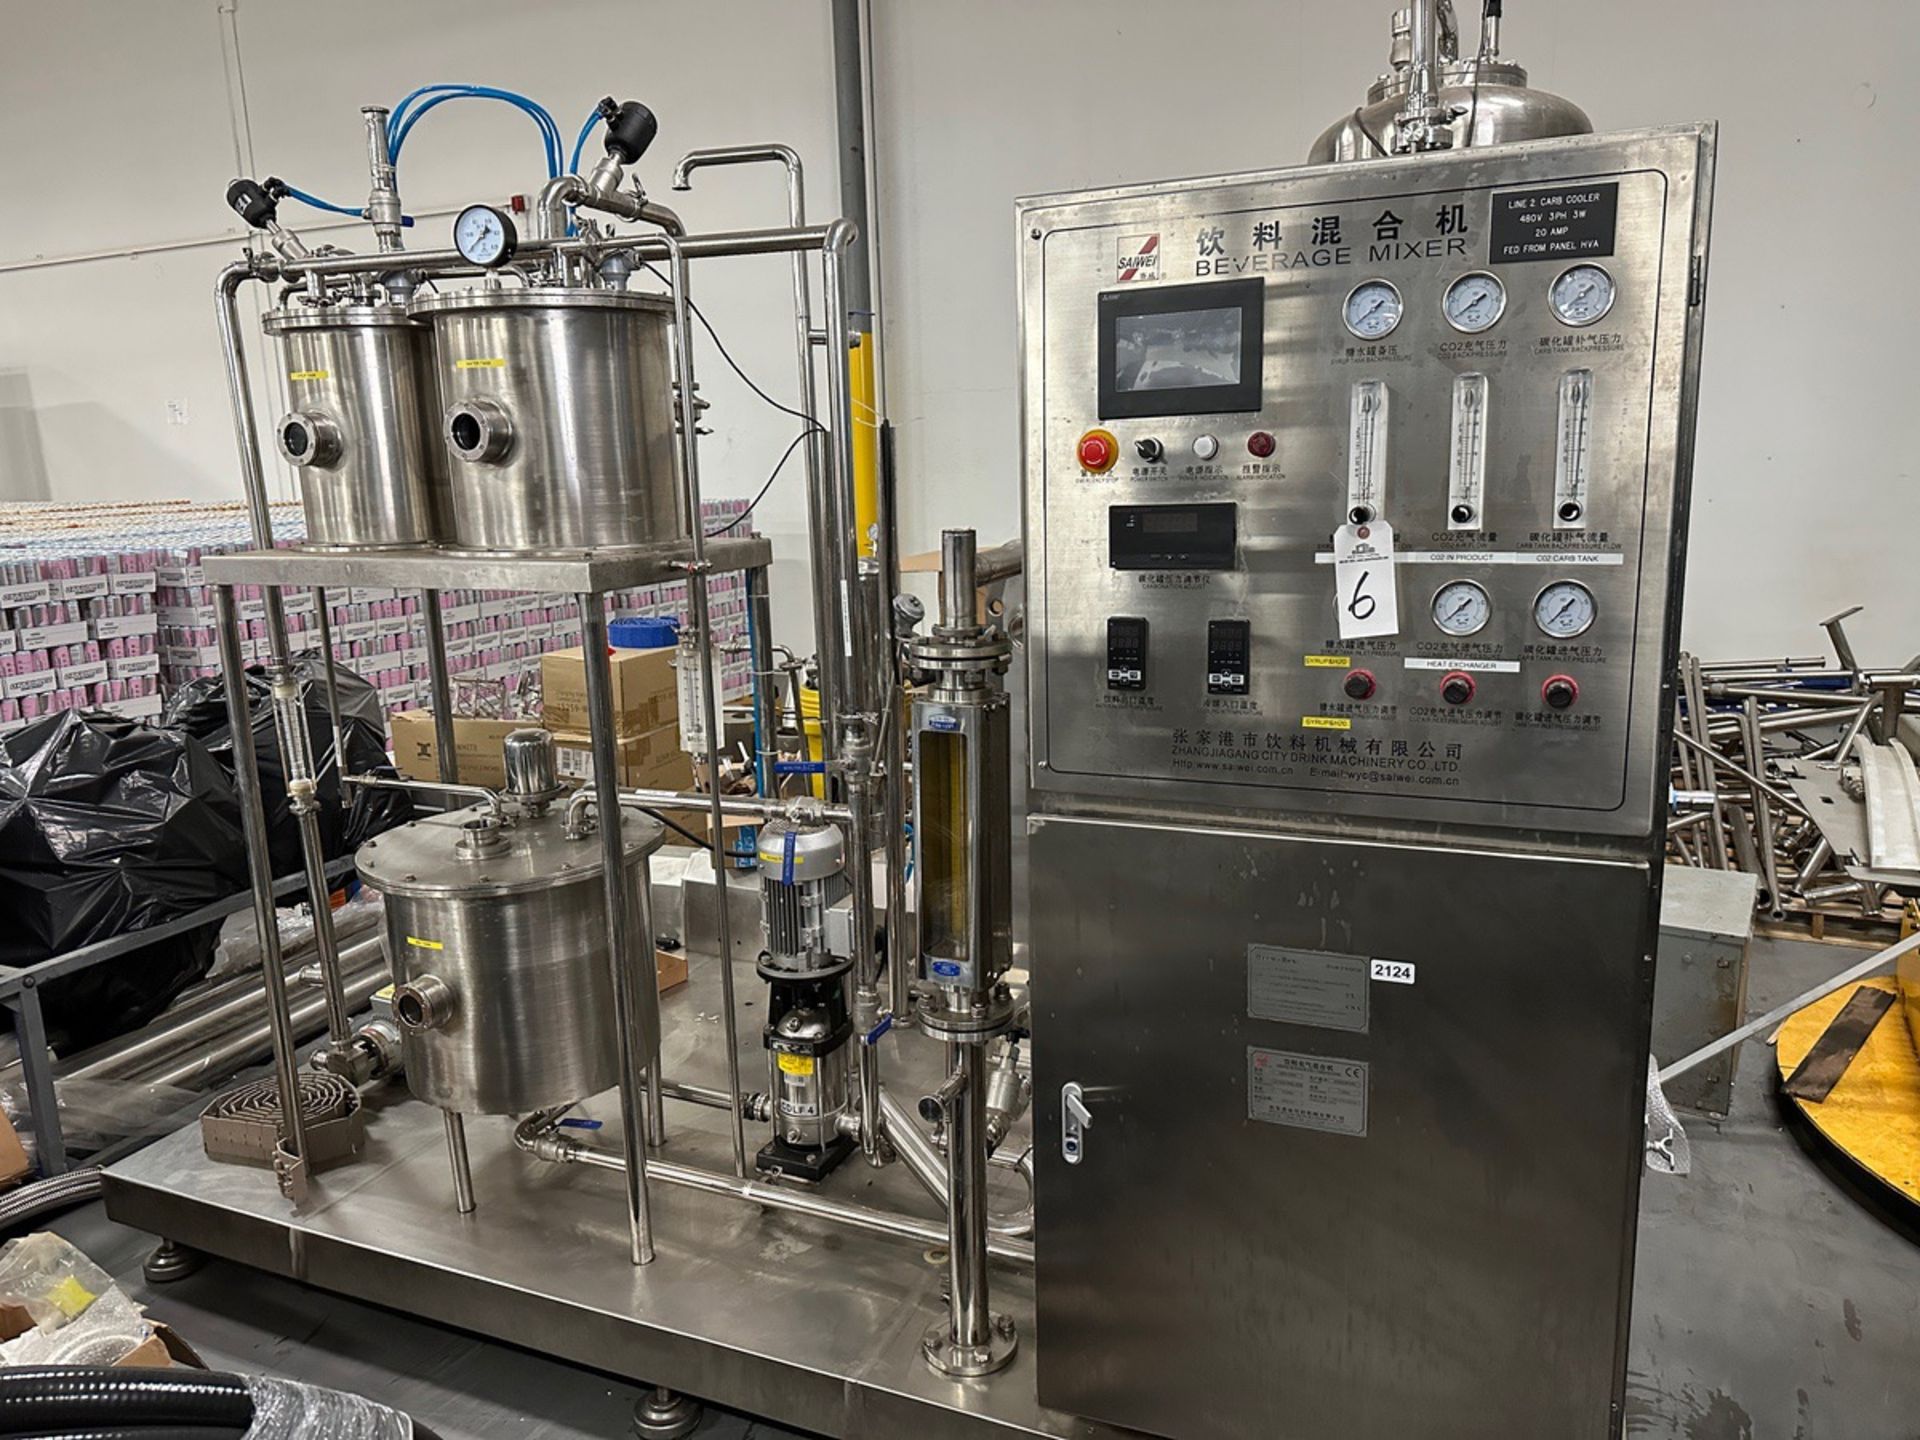 Saiwei Brew Bev QHS-5000 Drink Mixer with Carbonator, S/N SW2021-103, WPC Asset 2124 | Rig Fee $1750